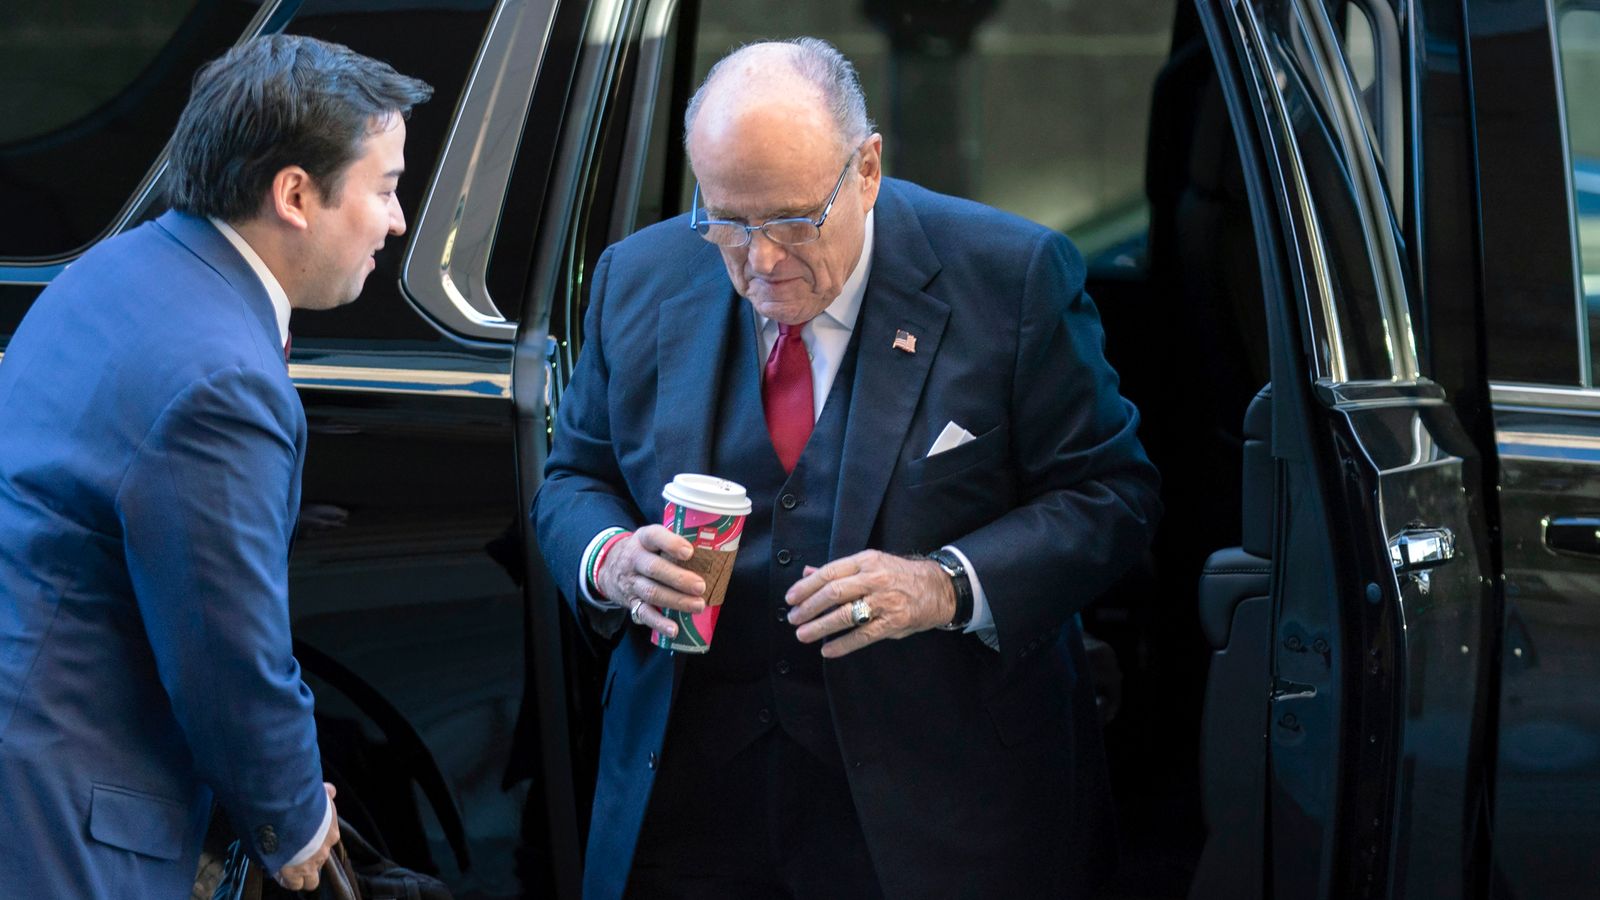 Rudy Giuliani ordered to pay 8m for false accusations against election workers